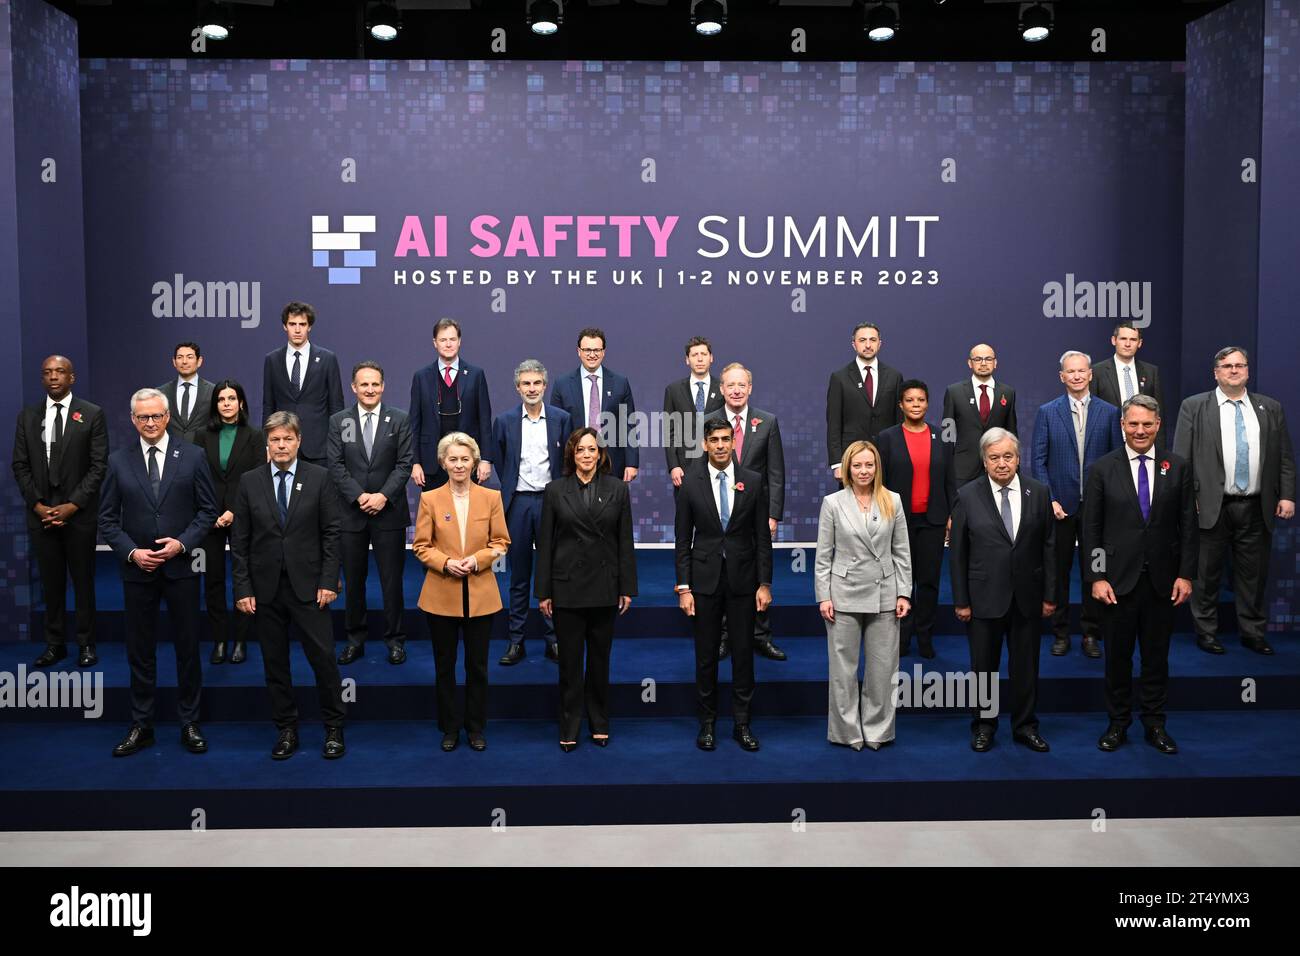 (first row, left to right) France's Minister for Economy, Finance, Industry and Digital Security Bruno Le Maire, German Economy and Climate Minister Robert Habeck, European Commission President Ursula von der Leyen, U.S. Vice President Kamala Harris, British Prime Minister Rishi Sunak, Italy's Prime Minister Giorgia Meloni, UN Secretary General Antonio Guterres and Australia's Deputy Prime Minister and Minister of Defence Richard Marles, (Middle and Back row left to right) Google's James Manyika, Tino Cuellar, President of the Carnegie Endowment for International Peace, Amba Kak, AI Now Instit Stock Photo